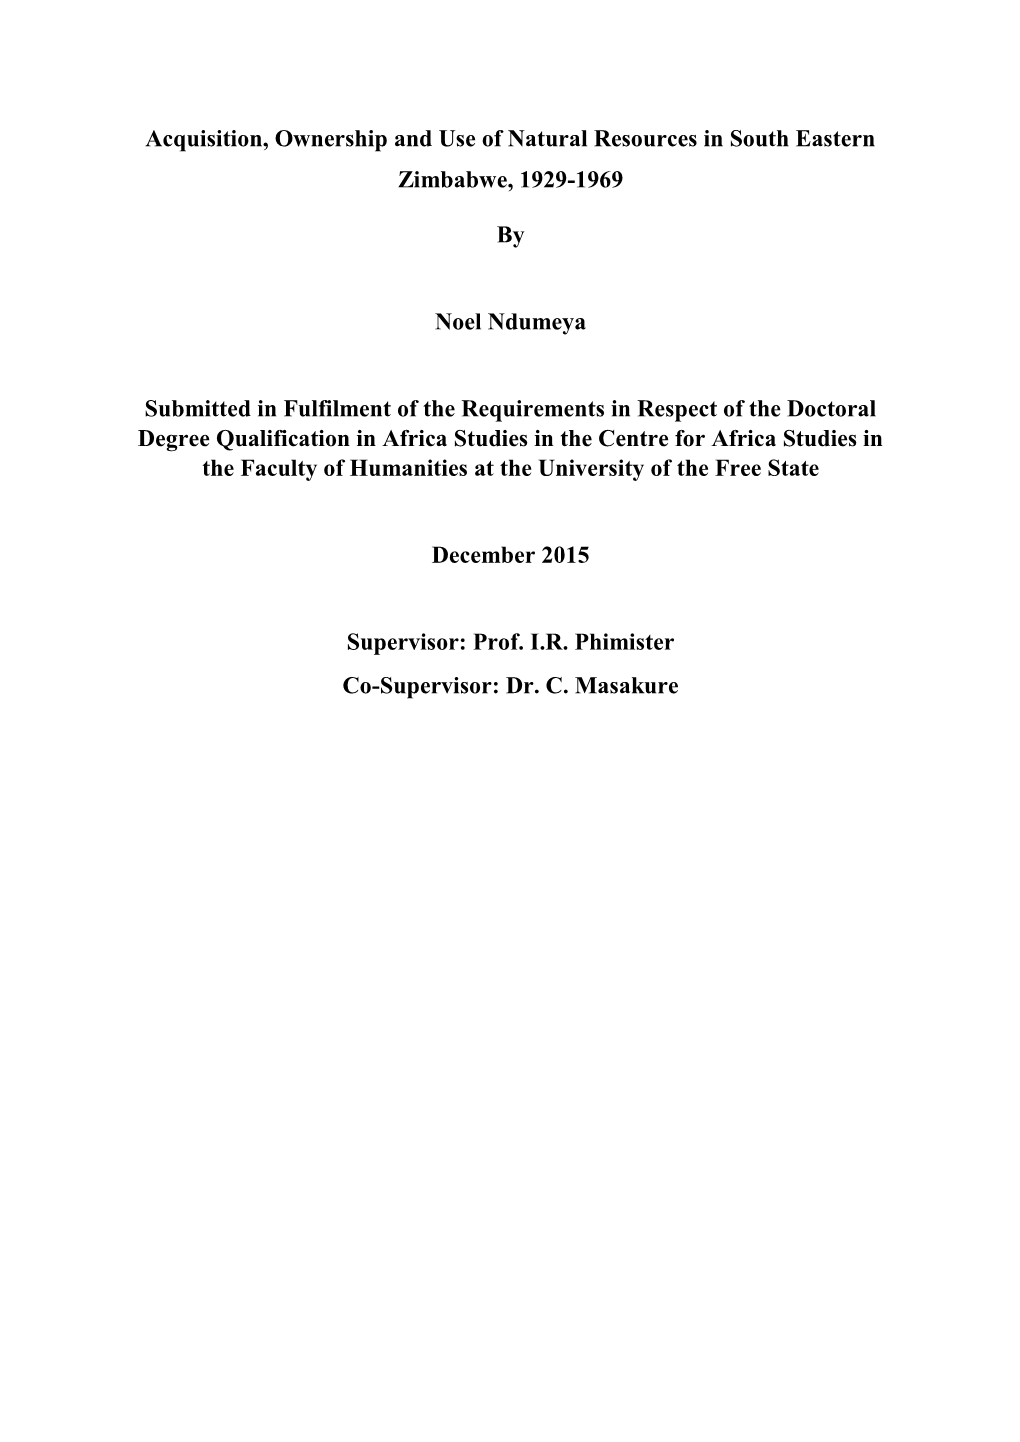 Acquisition, Ownership and Use of Natural Resources in South Eastern Zimbabwe, 1929-1969